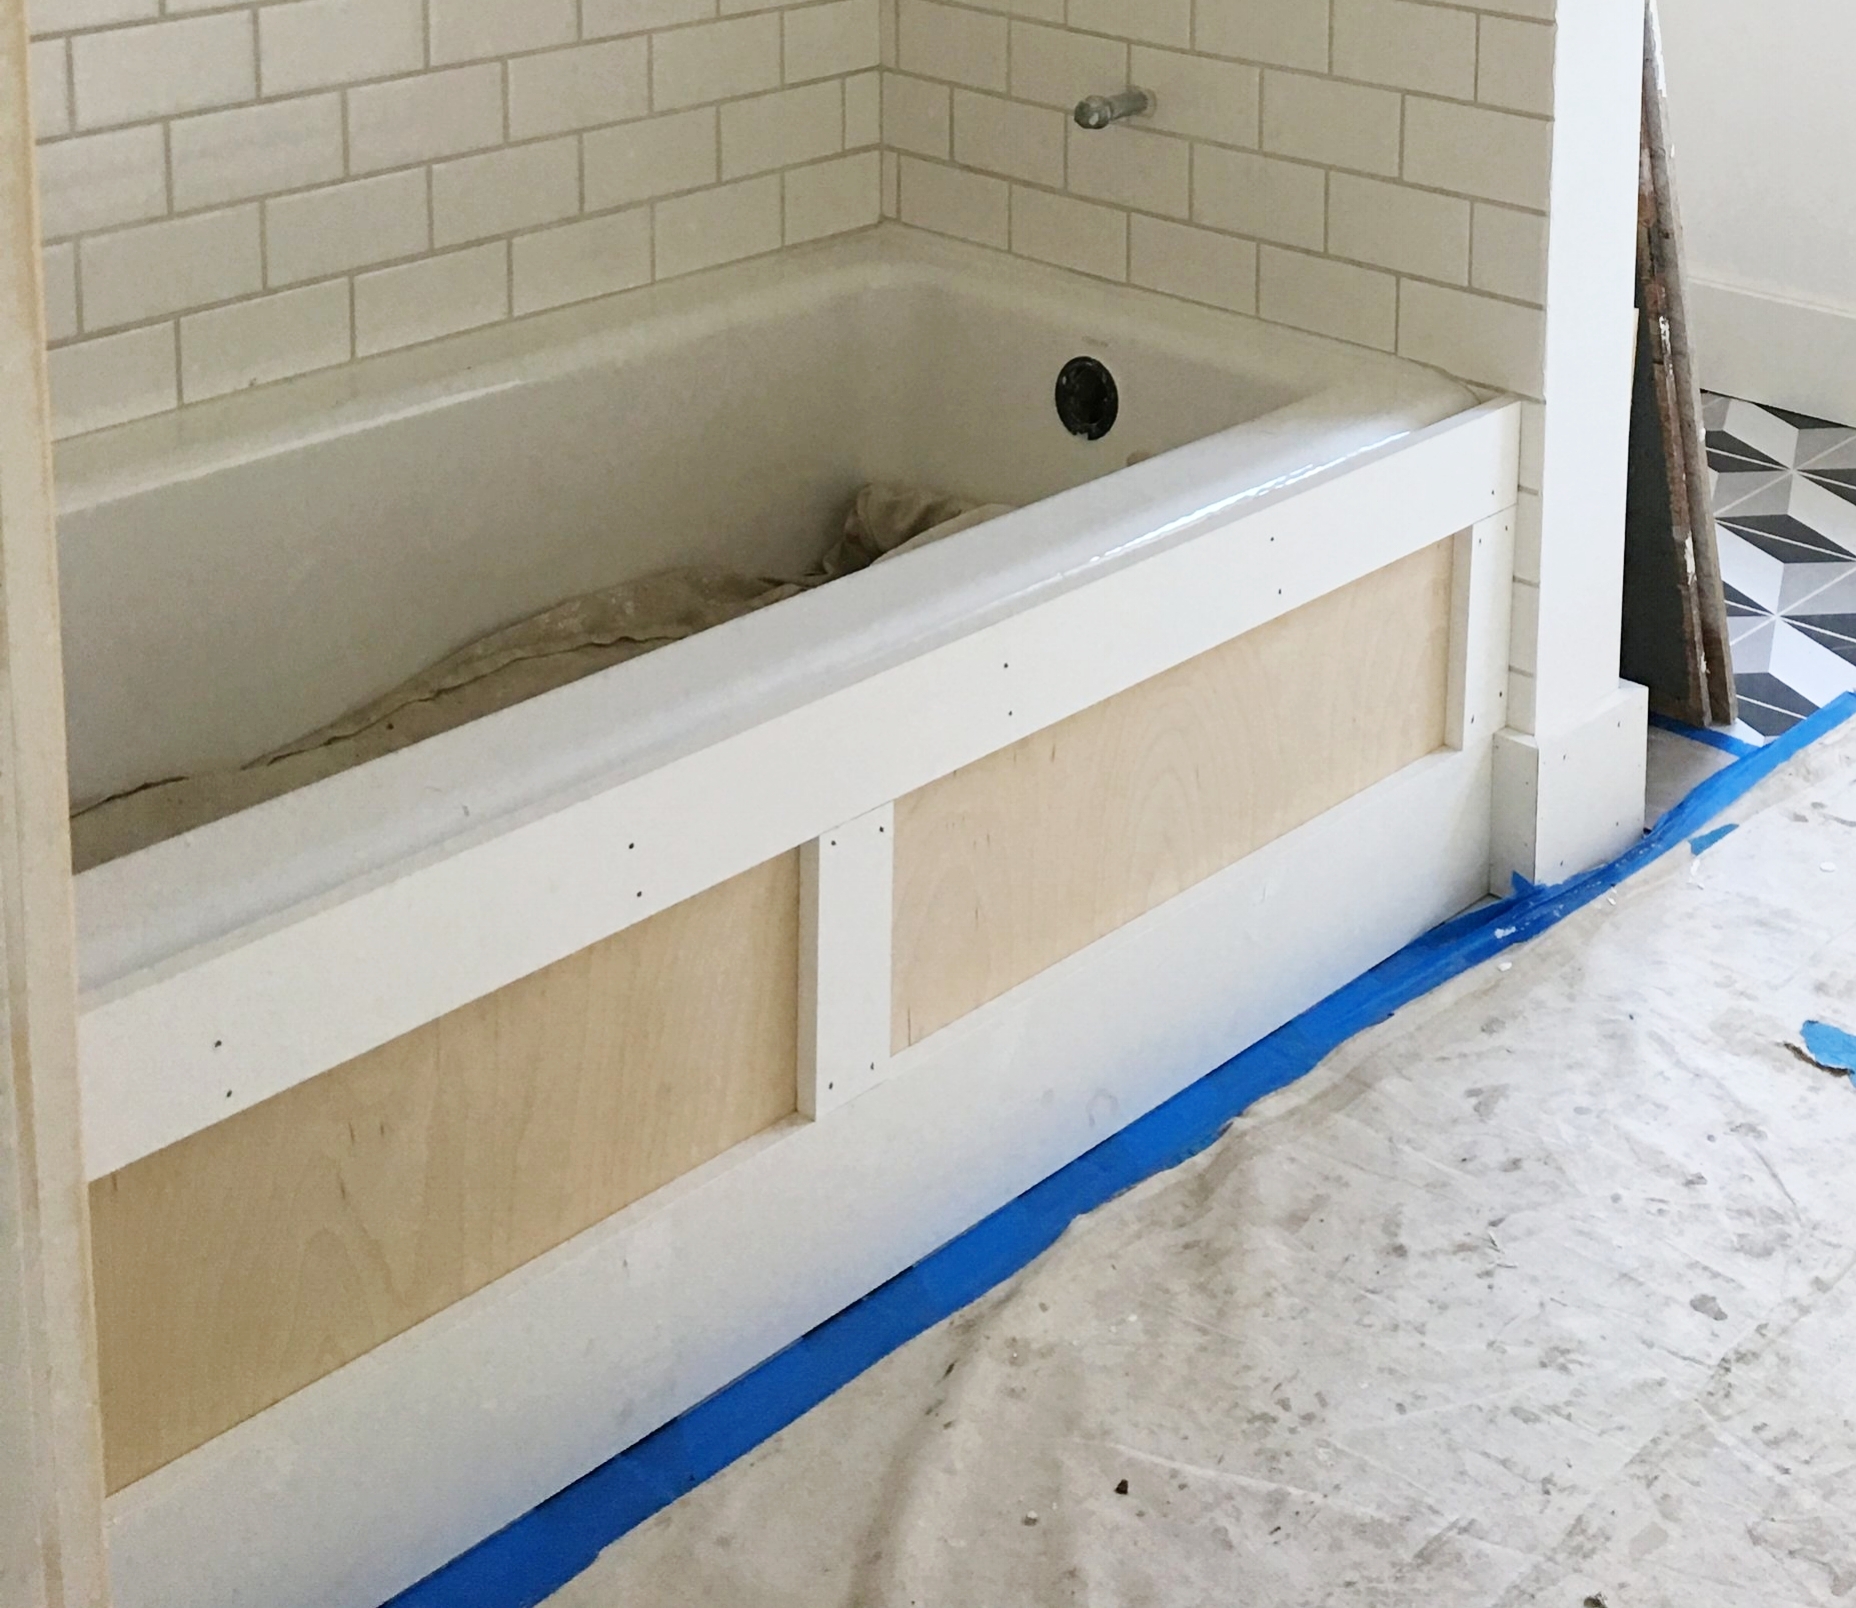 Flipping Houses Home Renovation In, Building A Bathtub Skirt